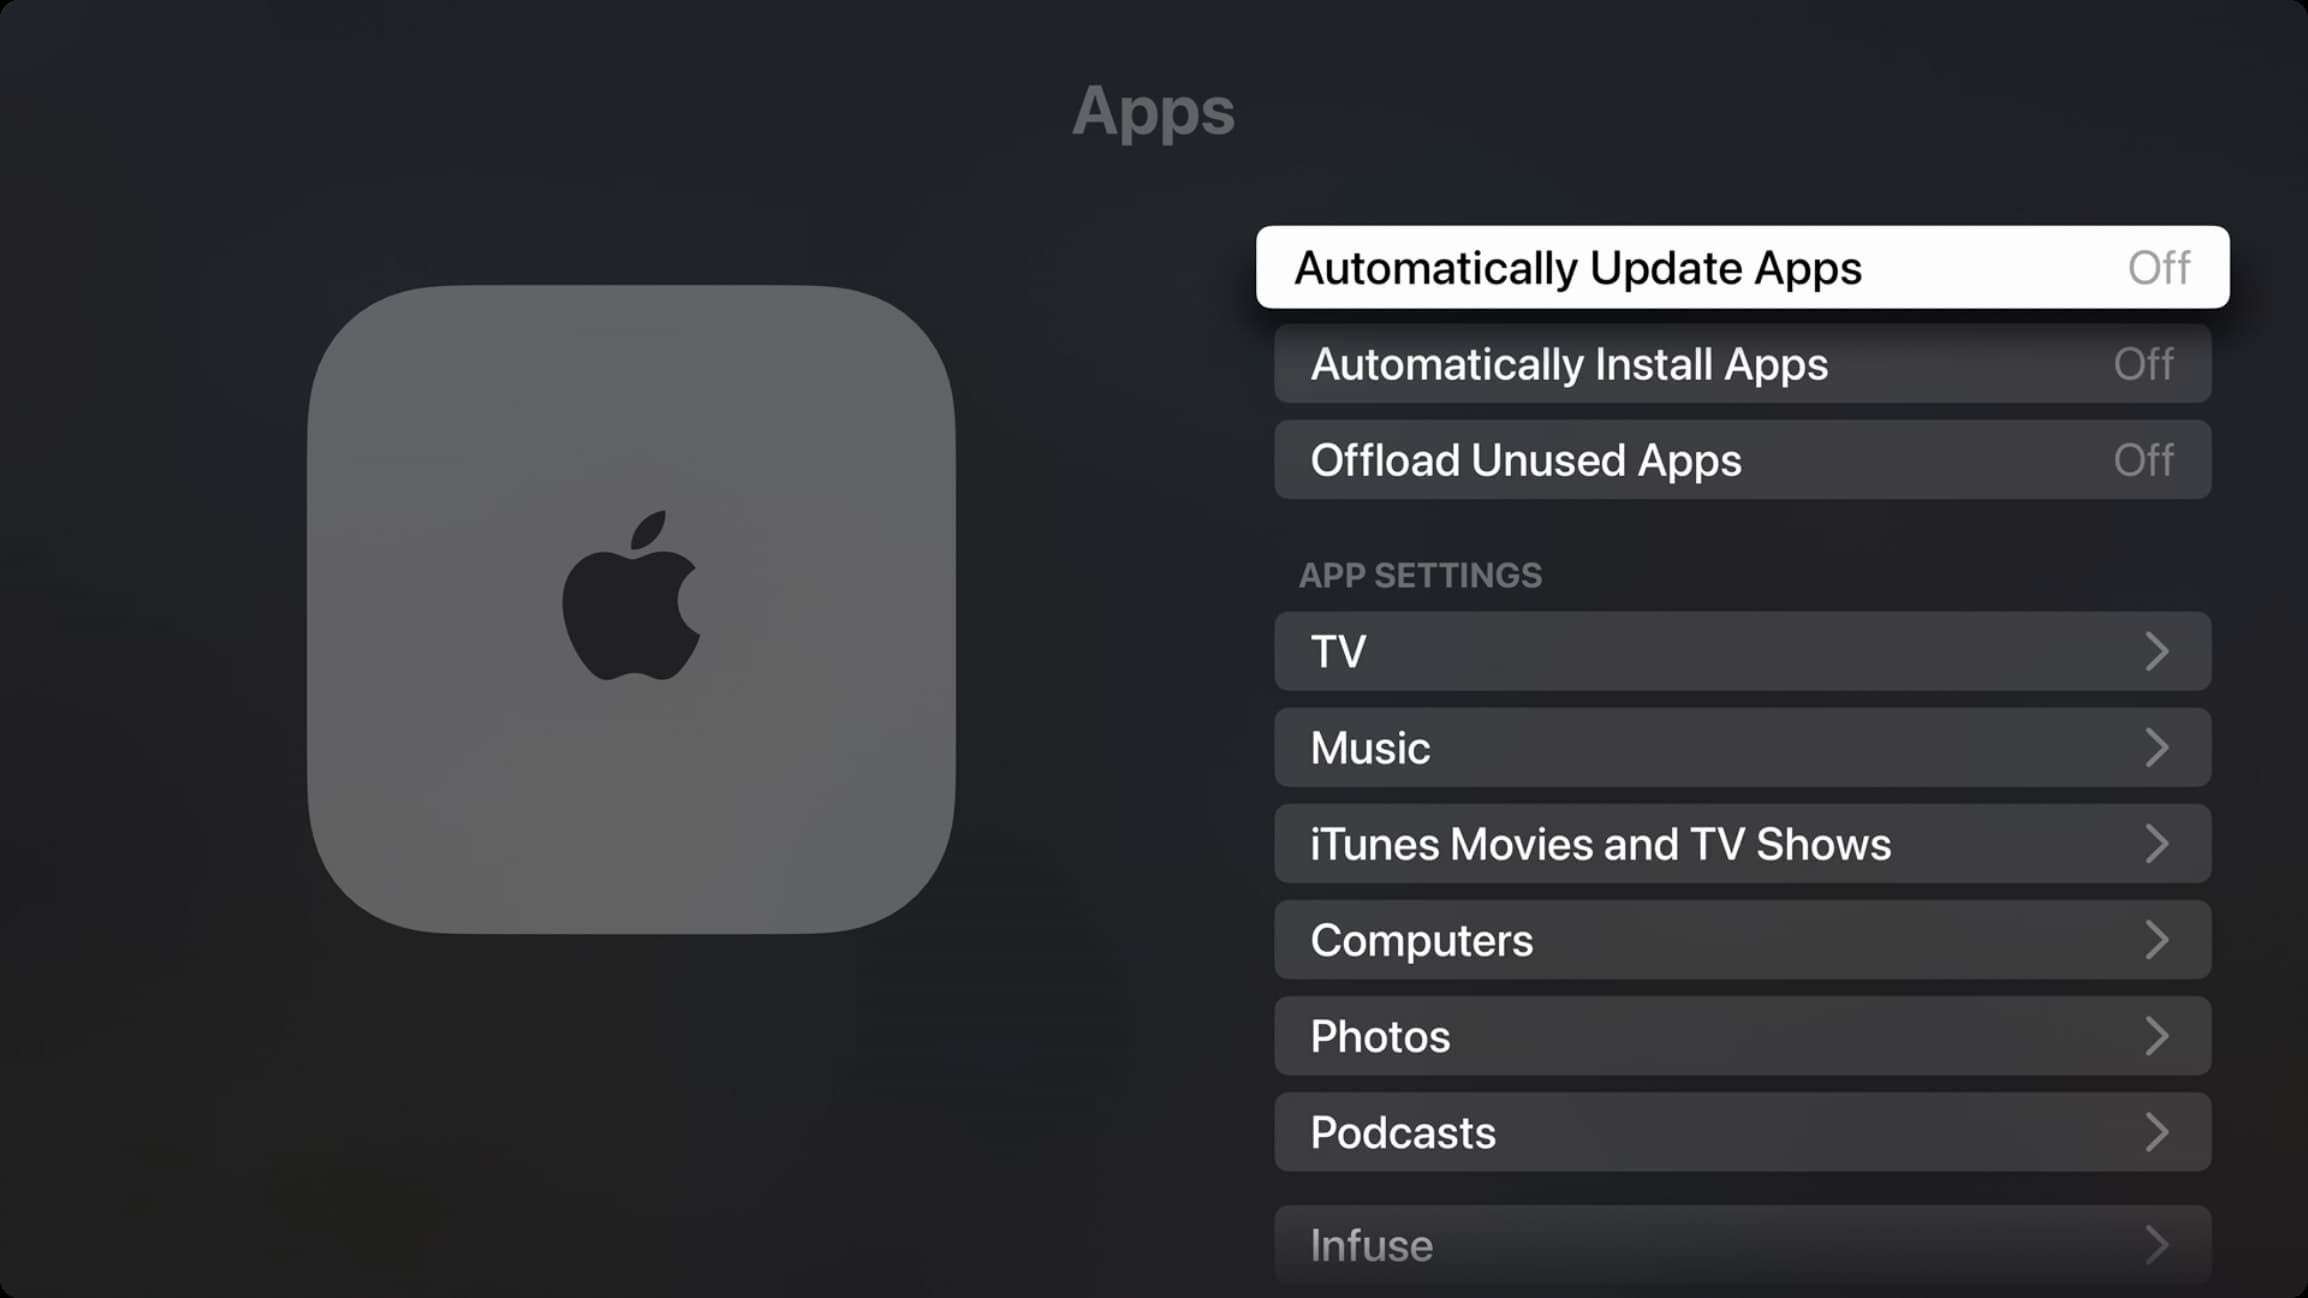 Automatically Update Apps turned off on Apple TV